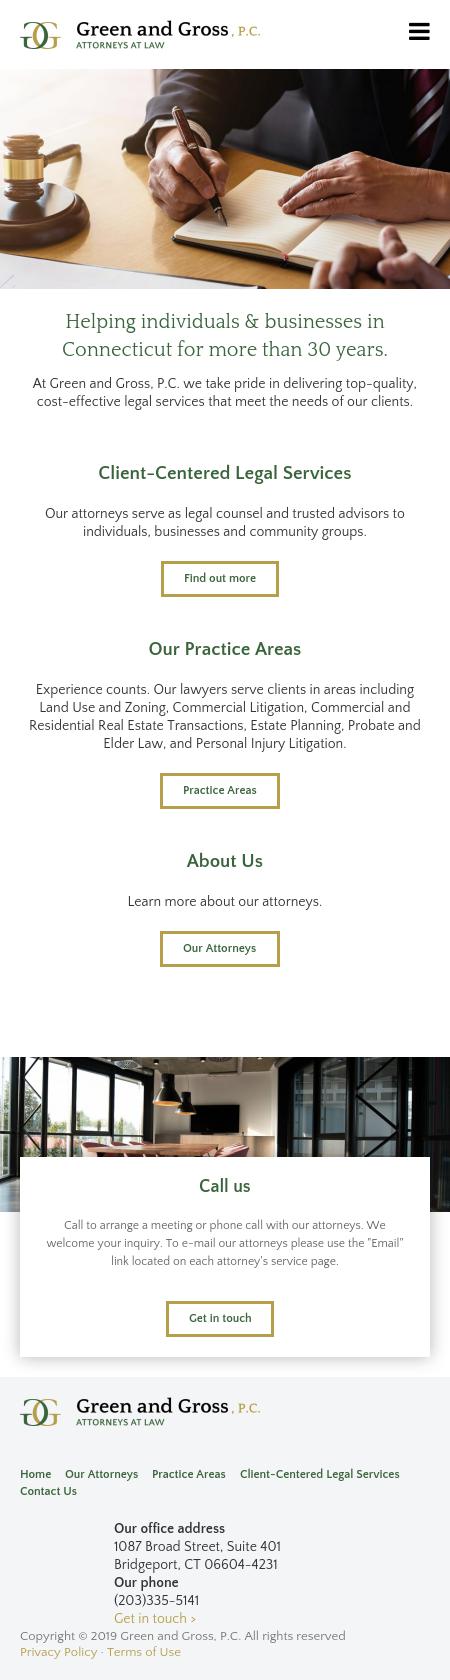 Green and Gross PC - Bridgeport CT Lawyers